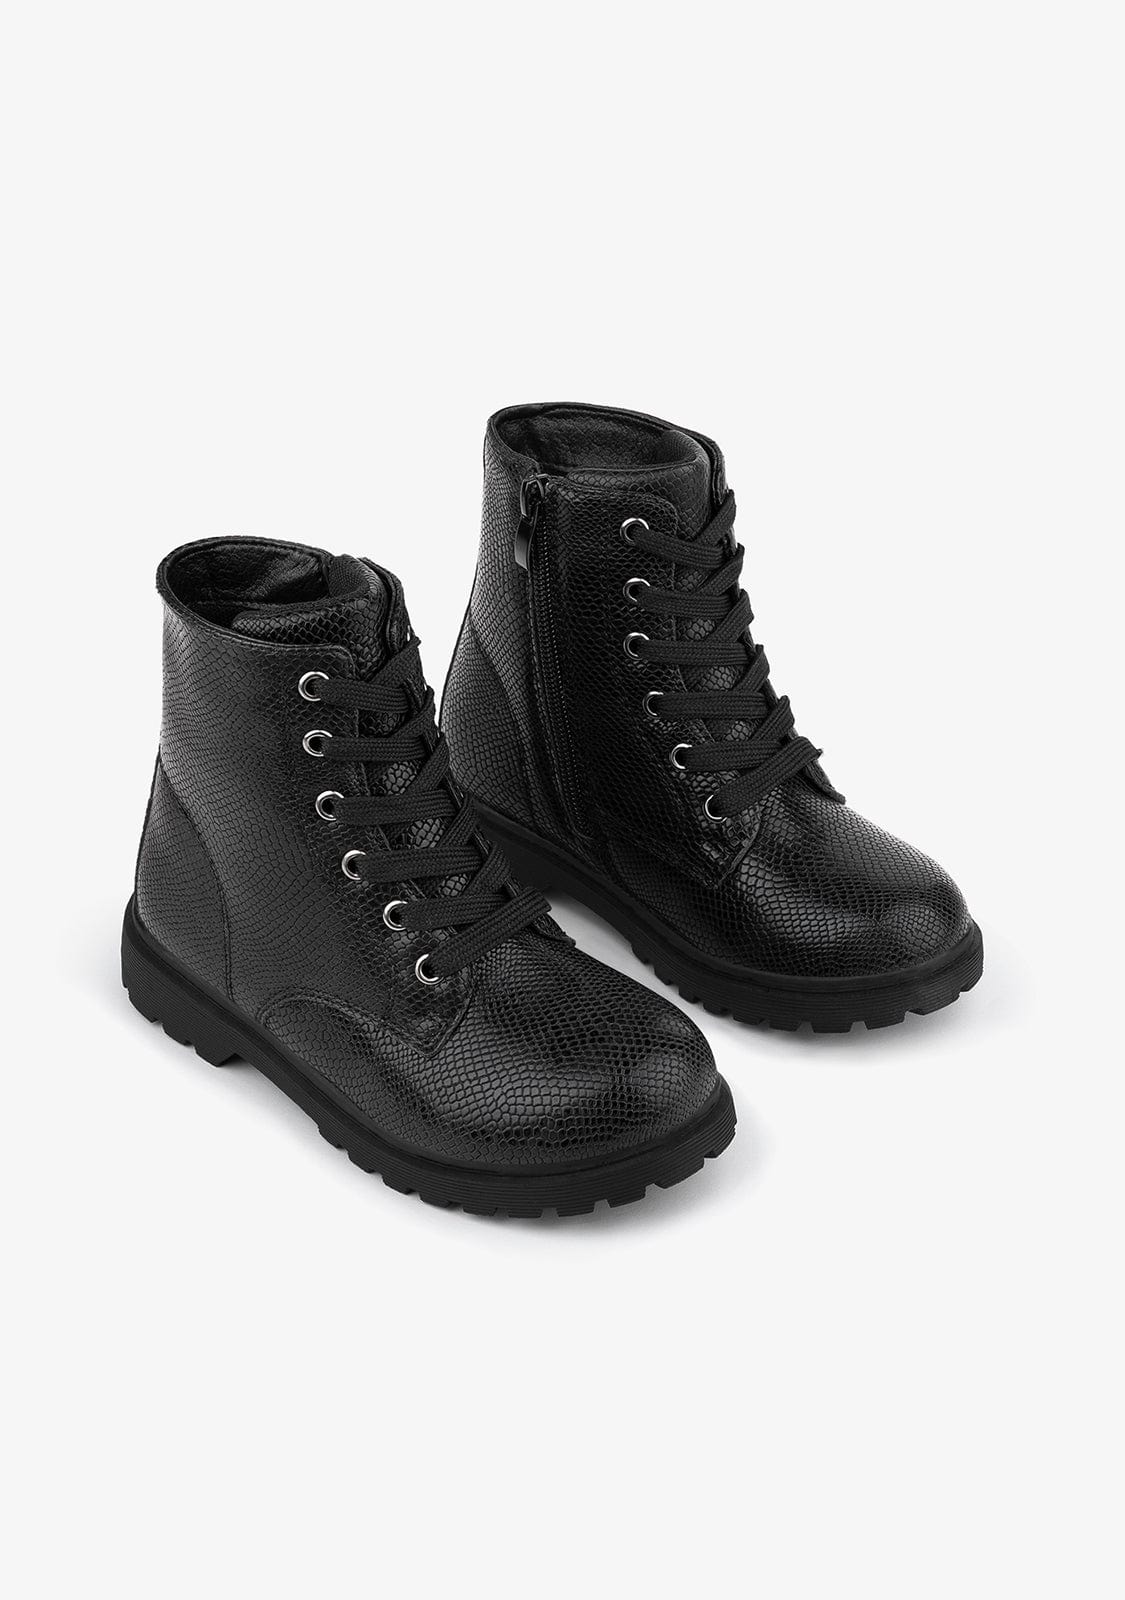 B&W JUNIOR Shoes Black Snake Metallized Combat Boots